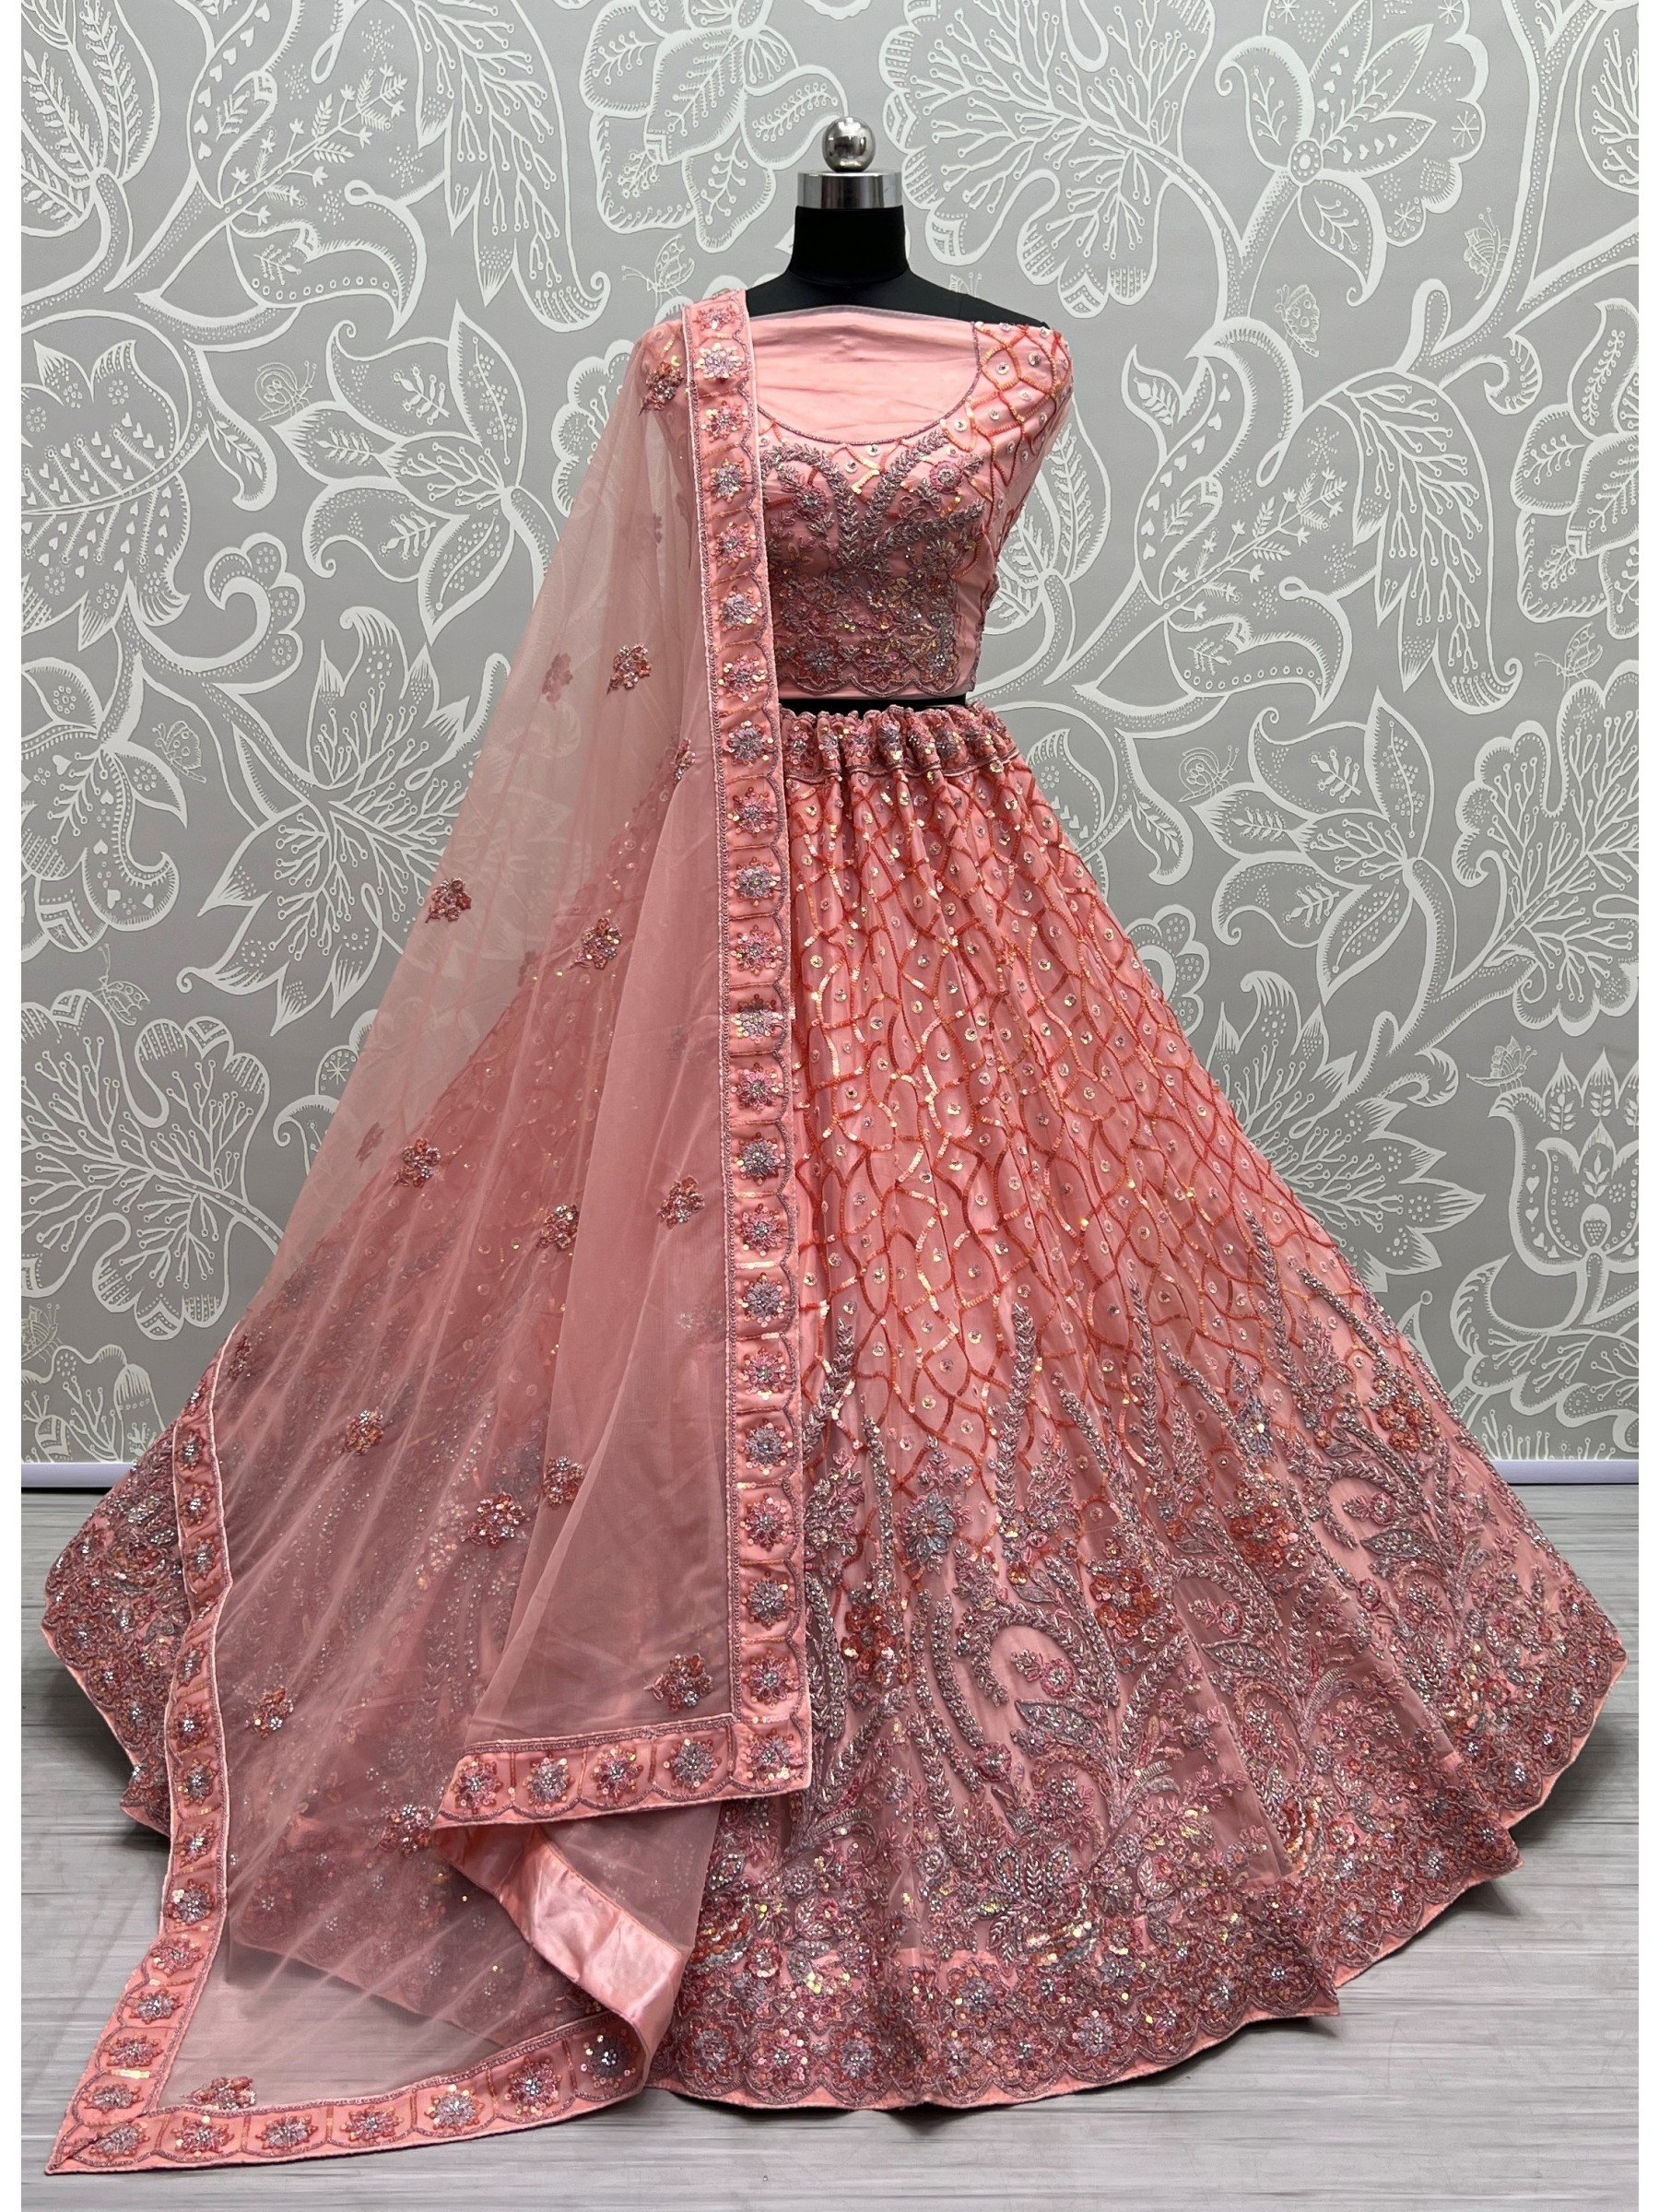 Soft Premium Net Wedding Wear Lehenga In Pink Color  With Embroidery Work